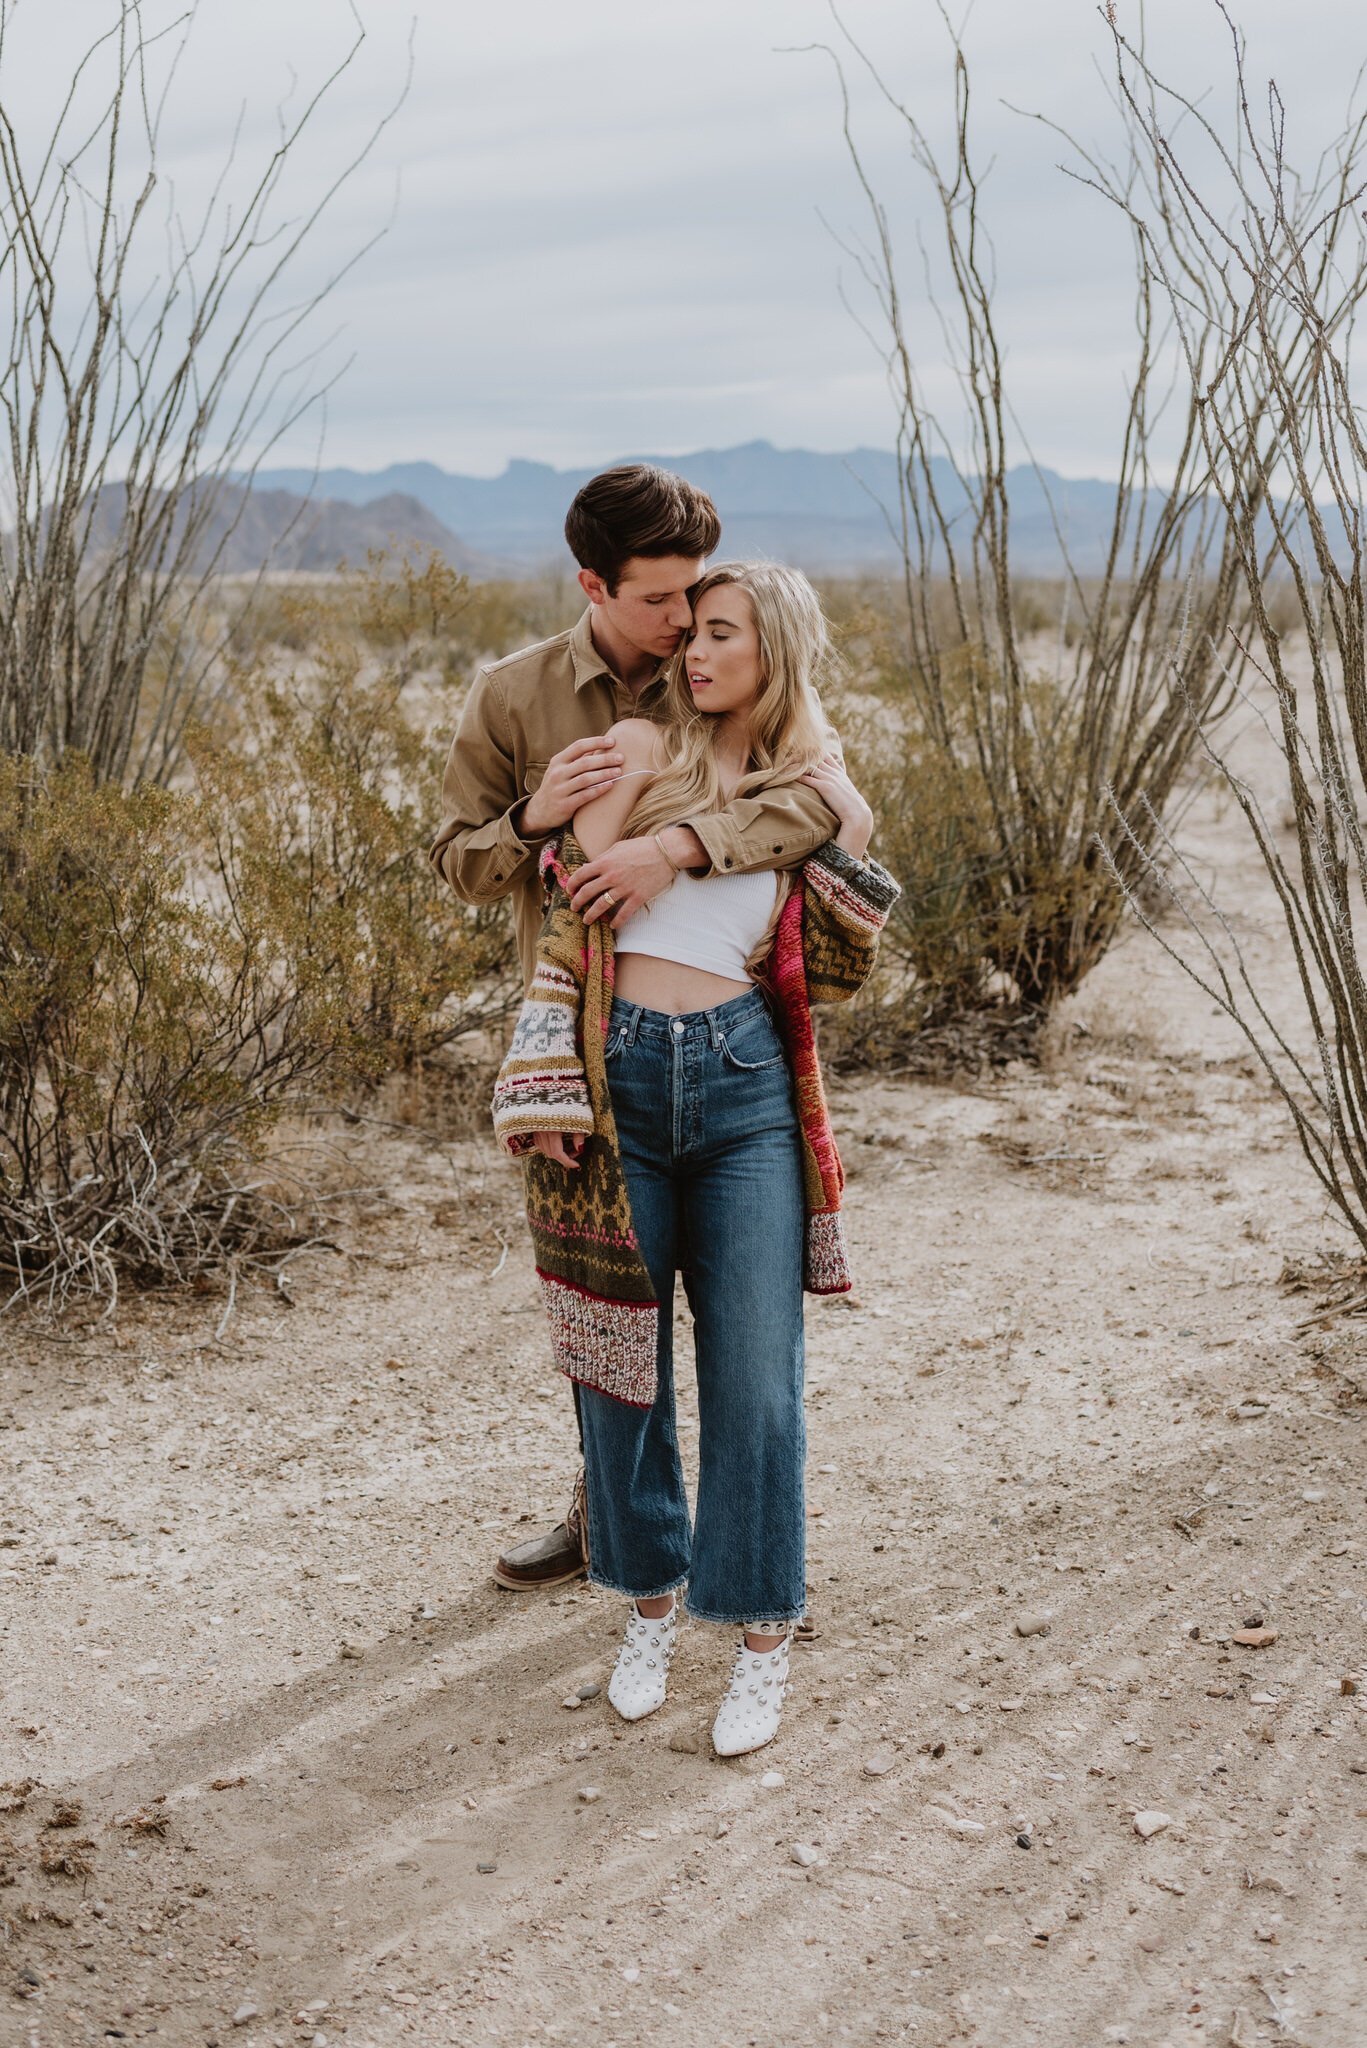 Kaylie-Sirek-Photography-Big-Bend-National-Park-Texas-Engagement-Session-Styled-You-003.jpg